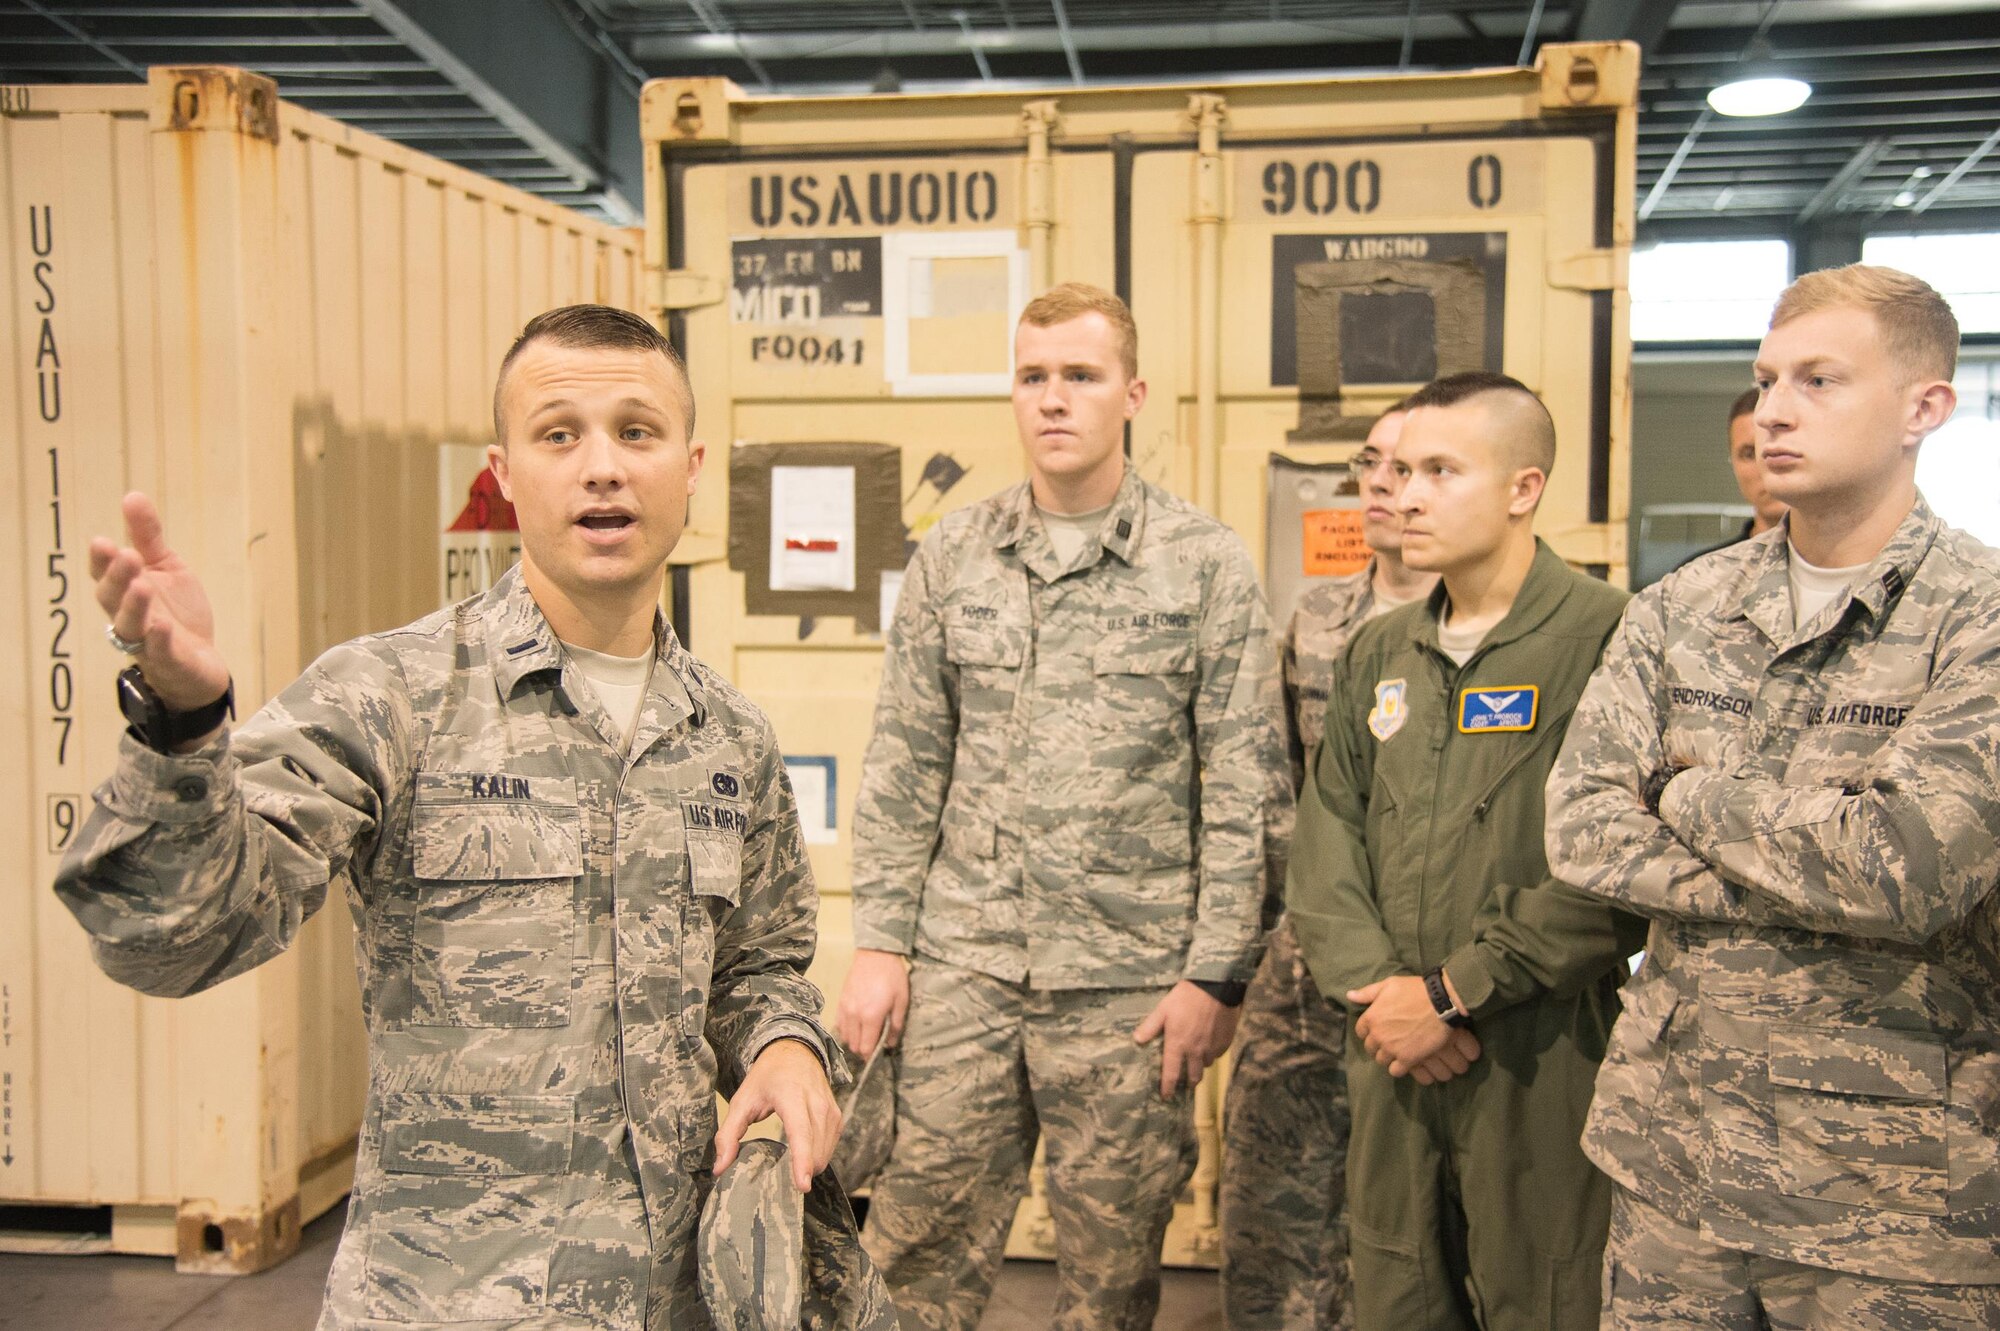 1st Lt. Hunter Kalin, 436th Aerial Port Squadron Air Terminal Operations Center flight commander, gives ROTC cadets a tour of the Super Port Oct. 11, 2017, at Dover Air Force Base, Del. Cadets from several colleges visited the base to get a closer look at the various occupational specialties offered by the Air Force. (U.S. Air Force photo by Mauricio Campino)